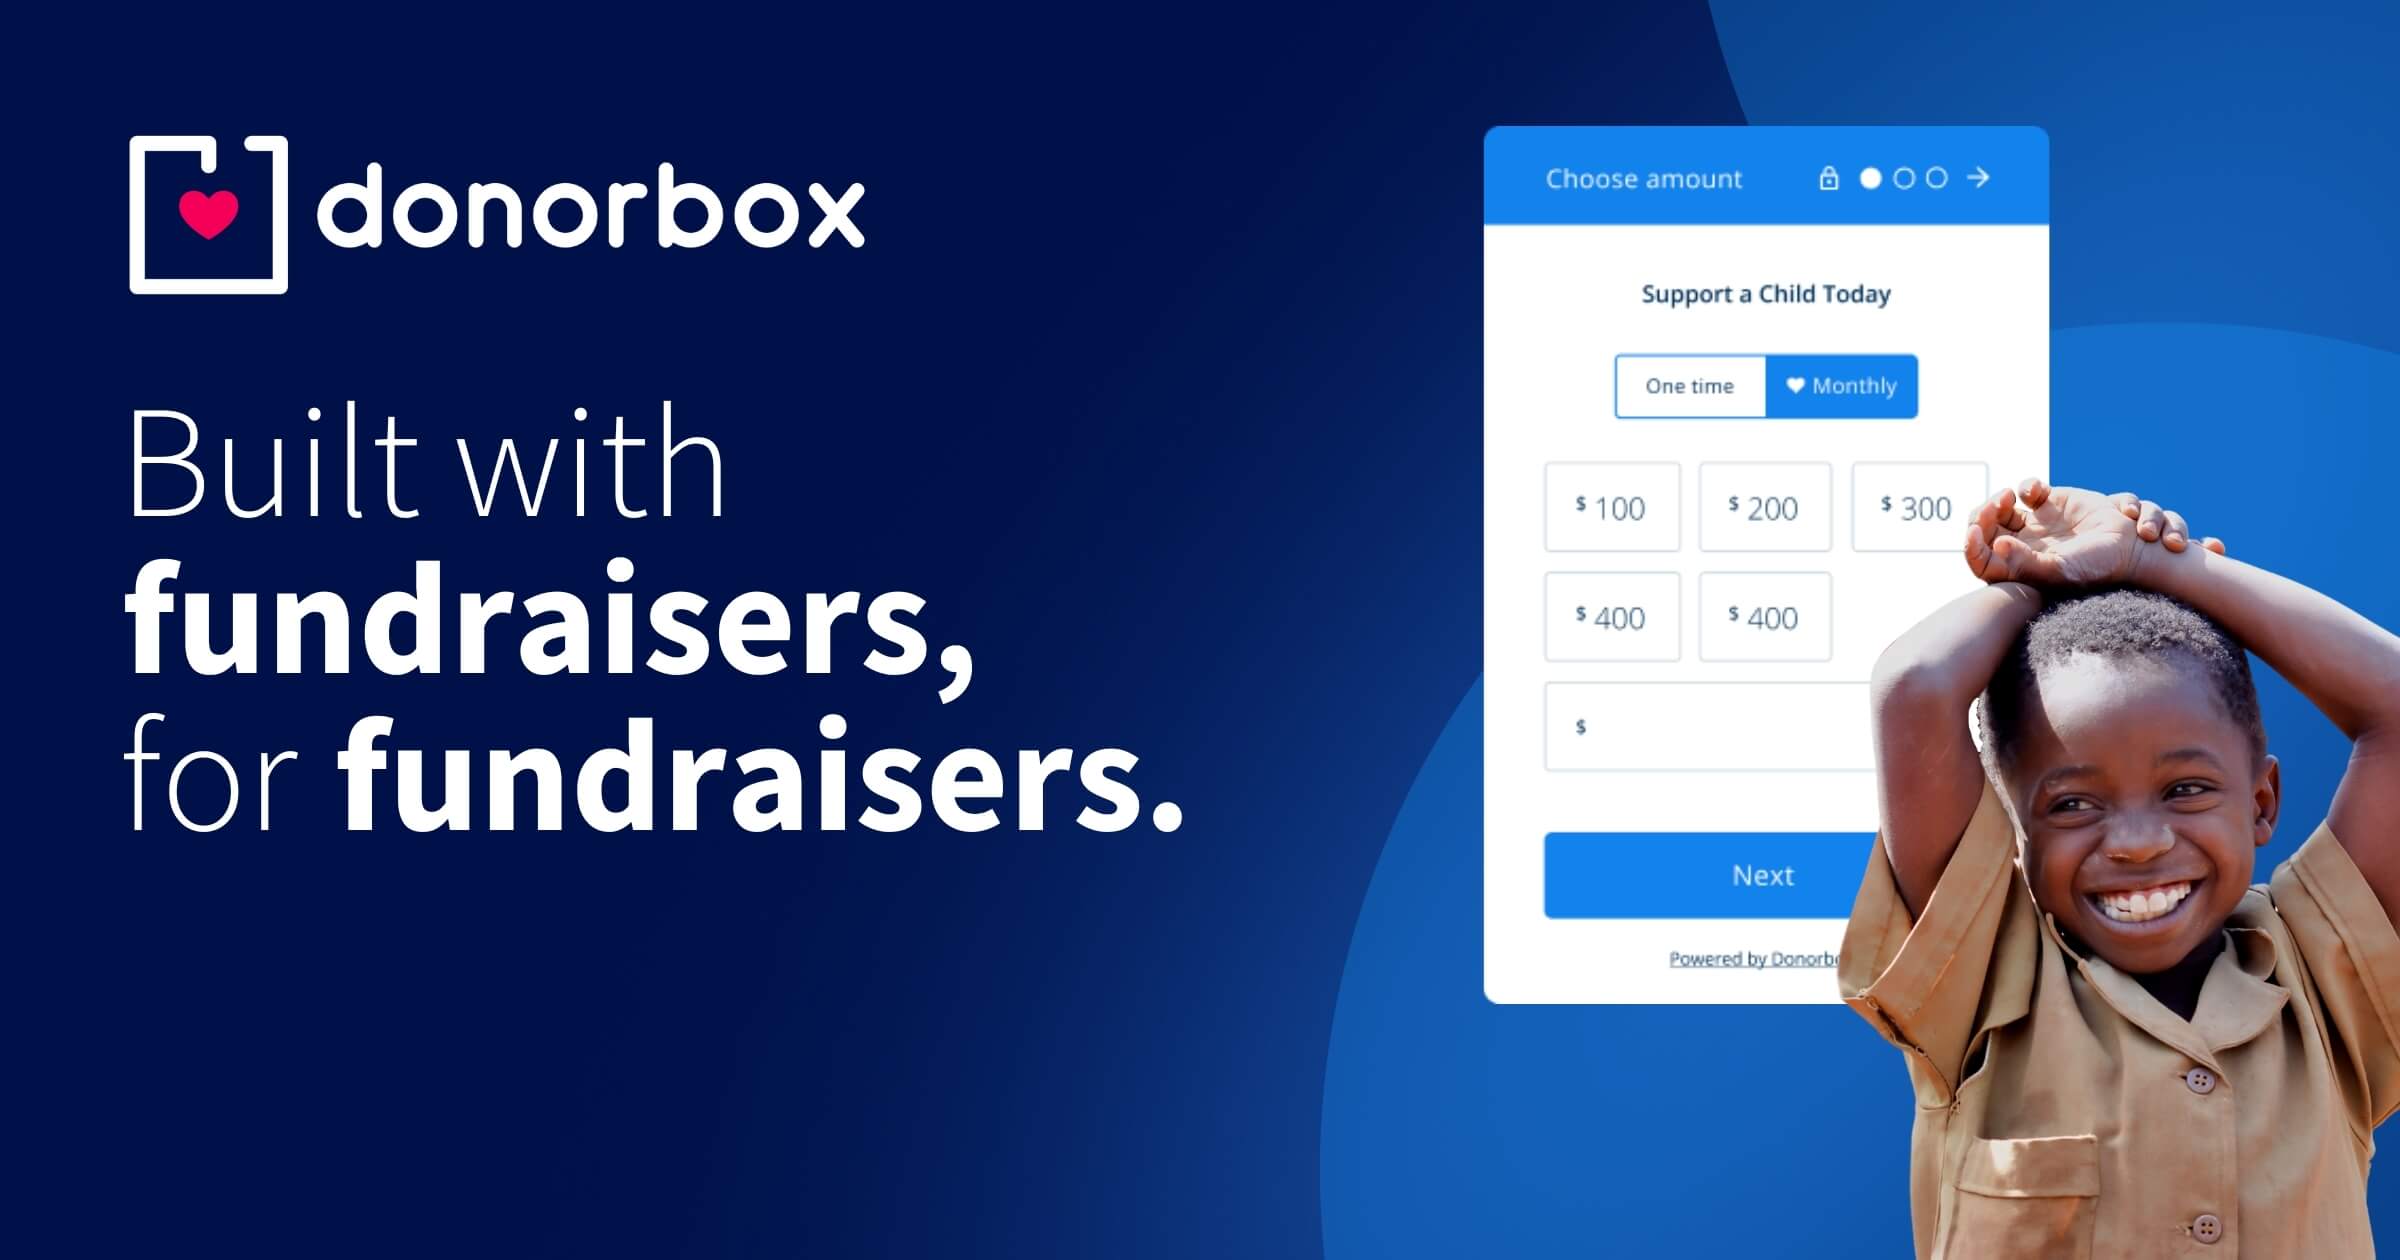 (c) Donorbox.org